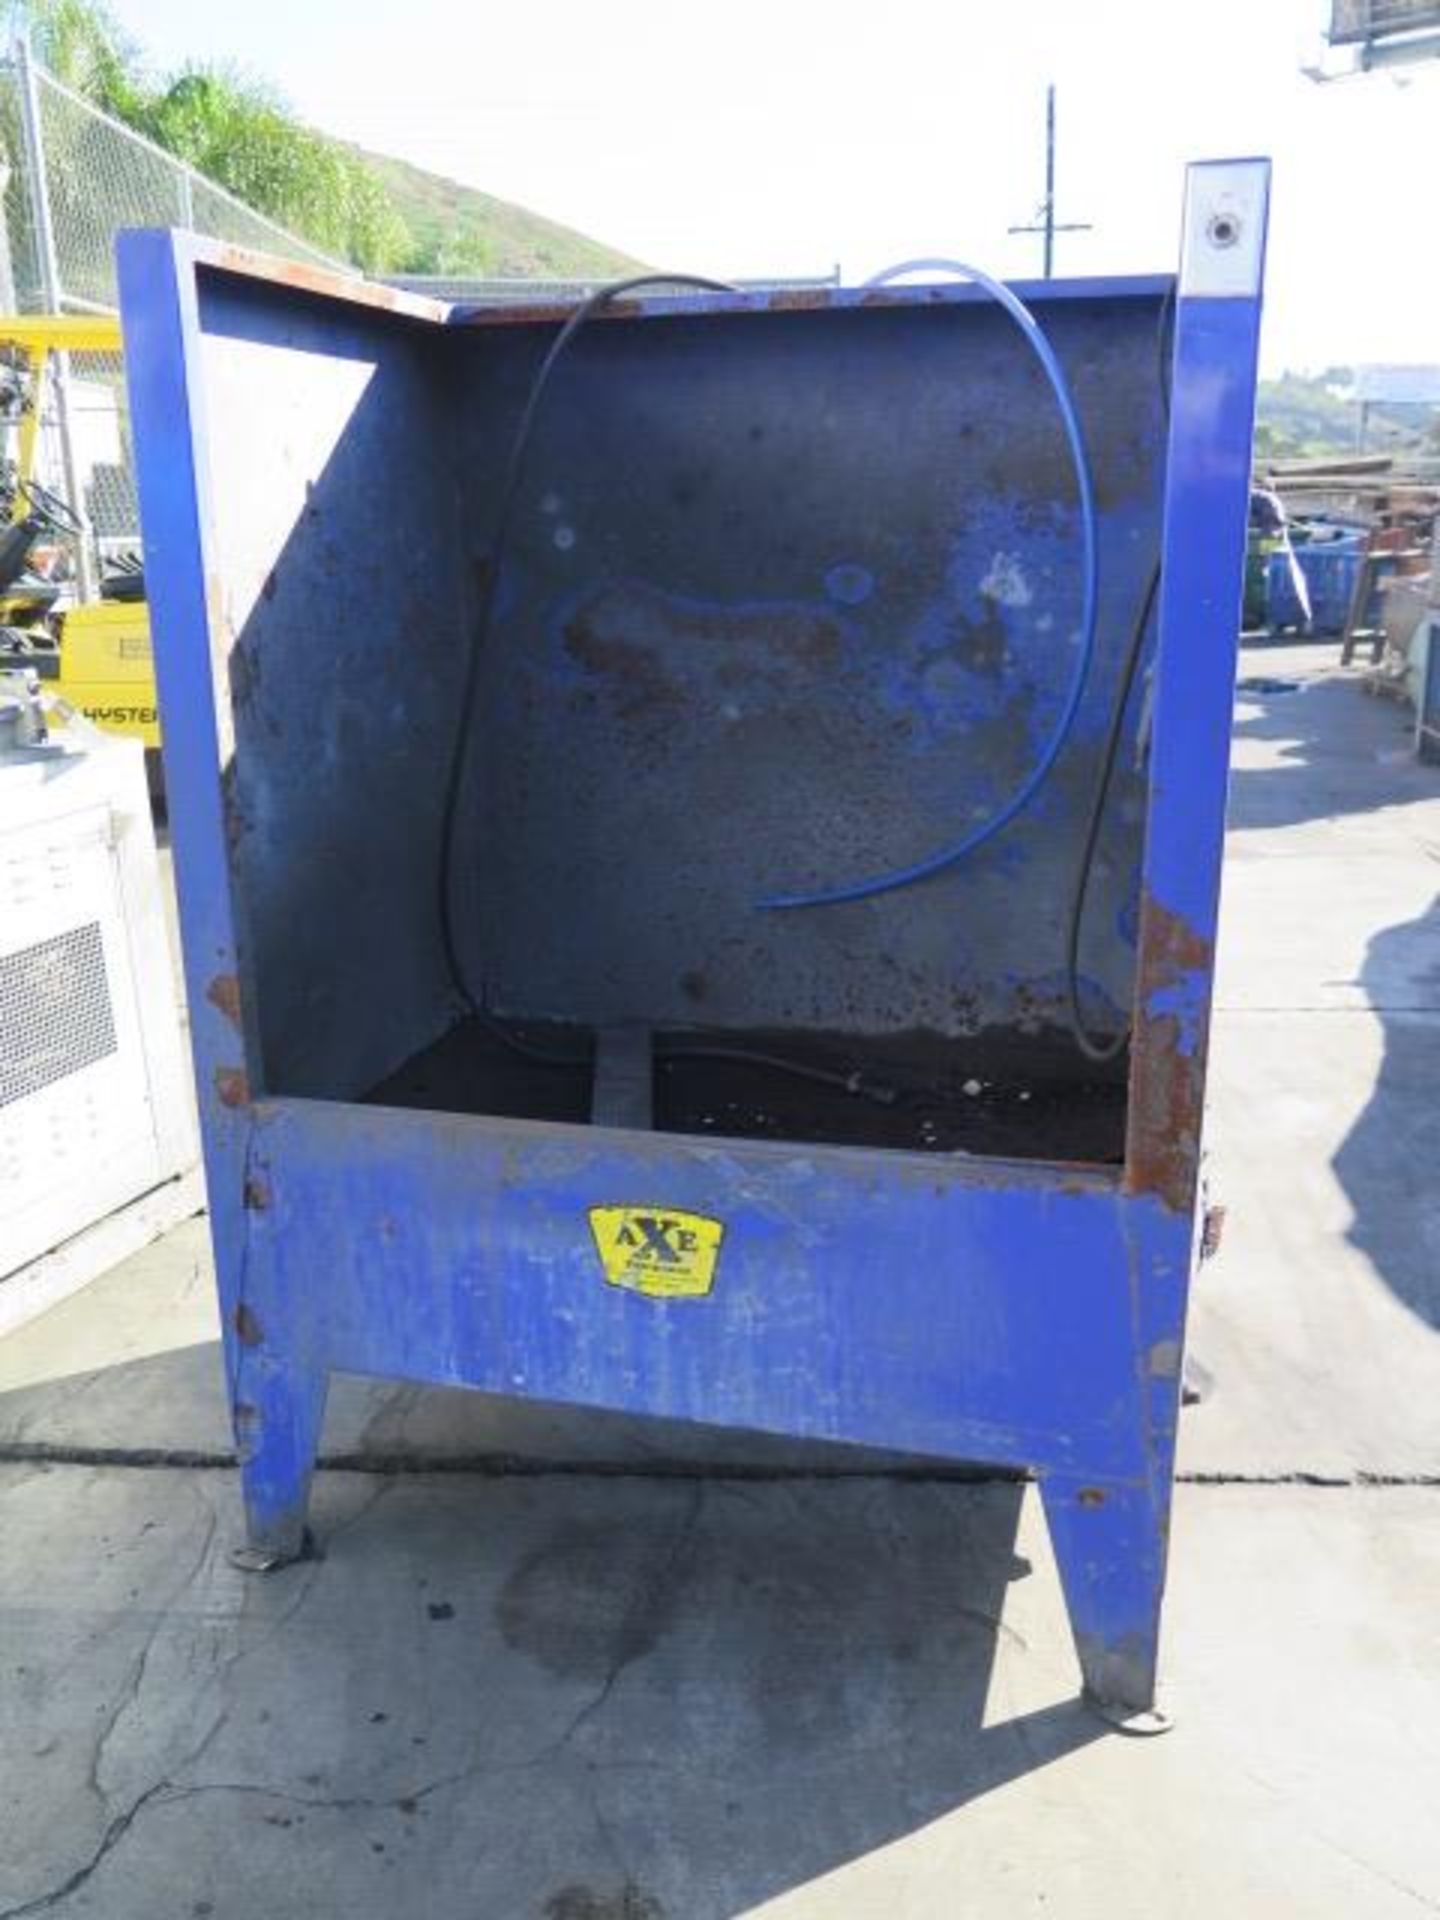 Axe Engine Washing Booth (SOLD AS-IS - NO WARRANTY)